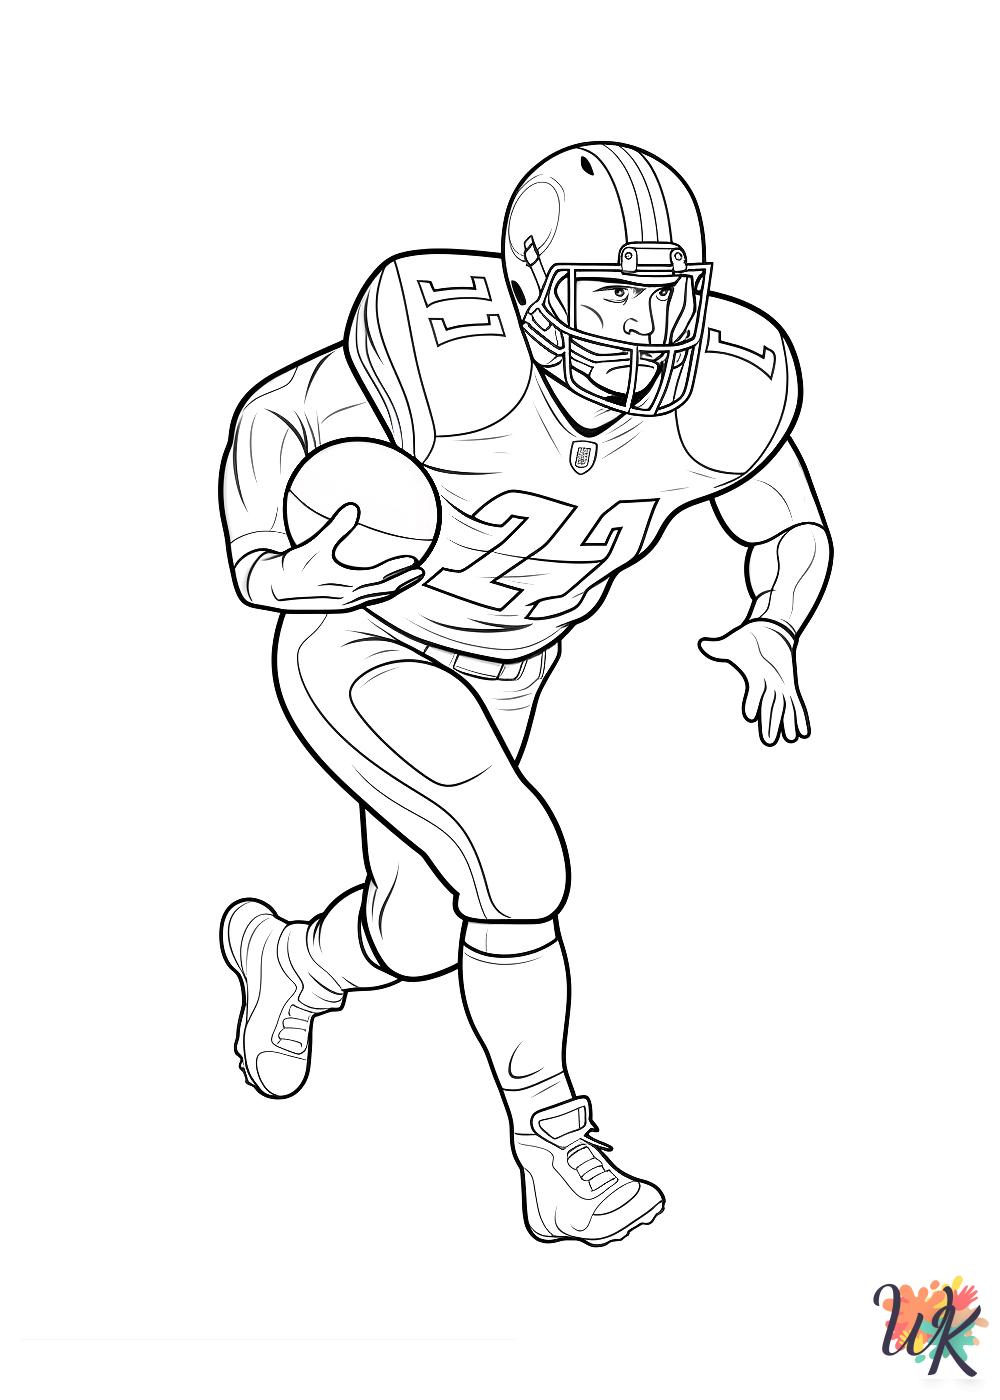 NFL Coloring Pages 13